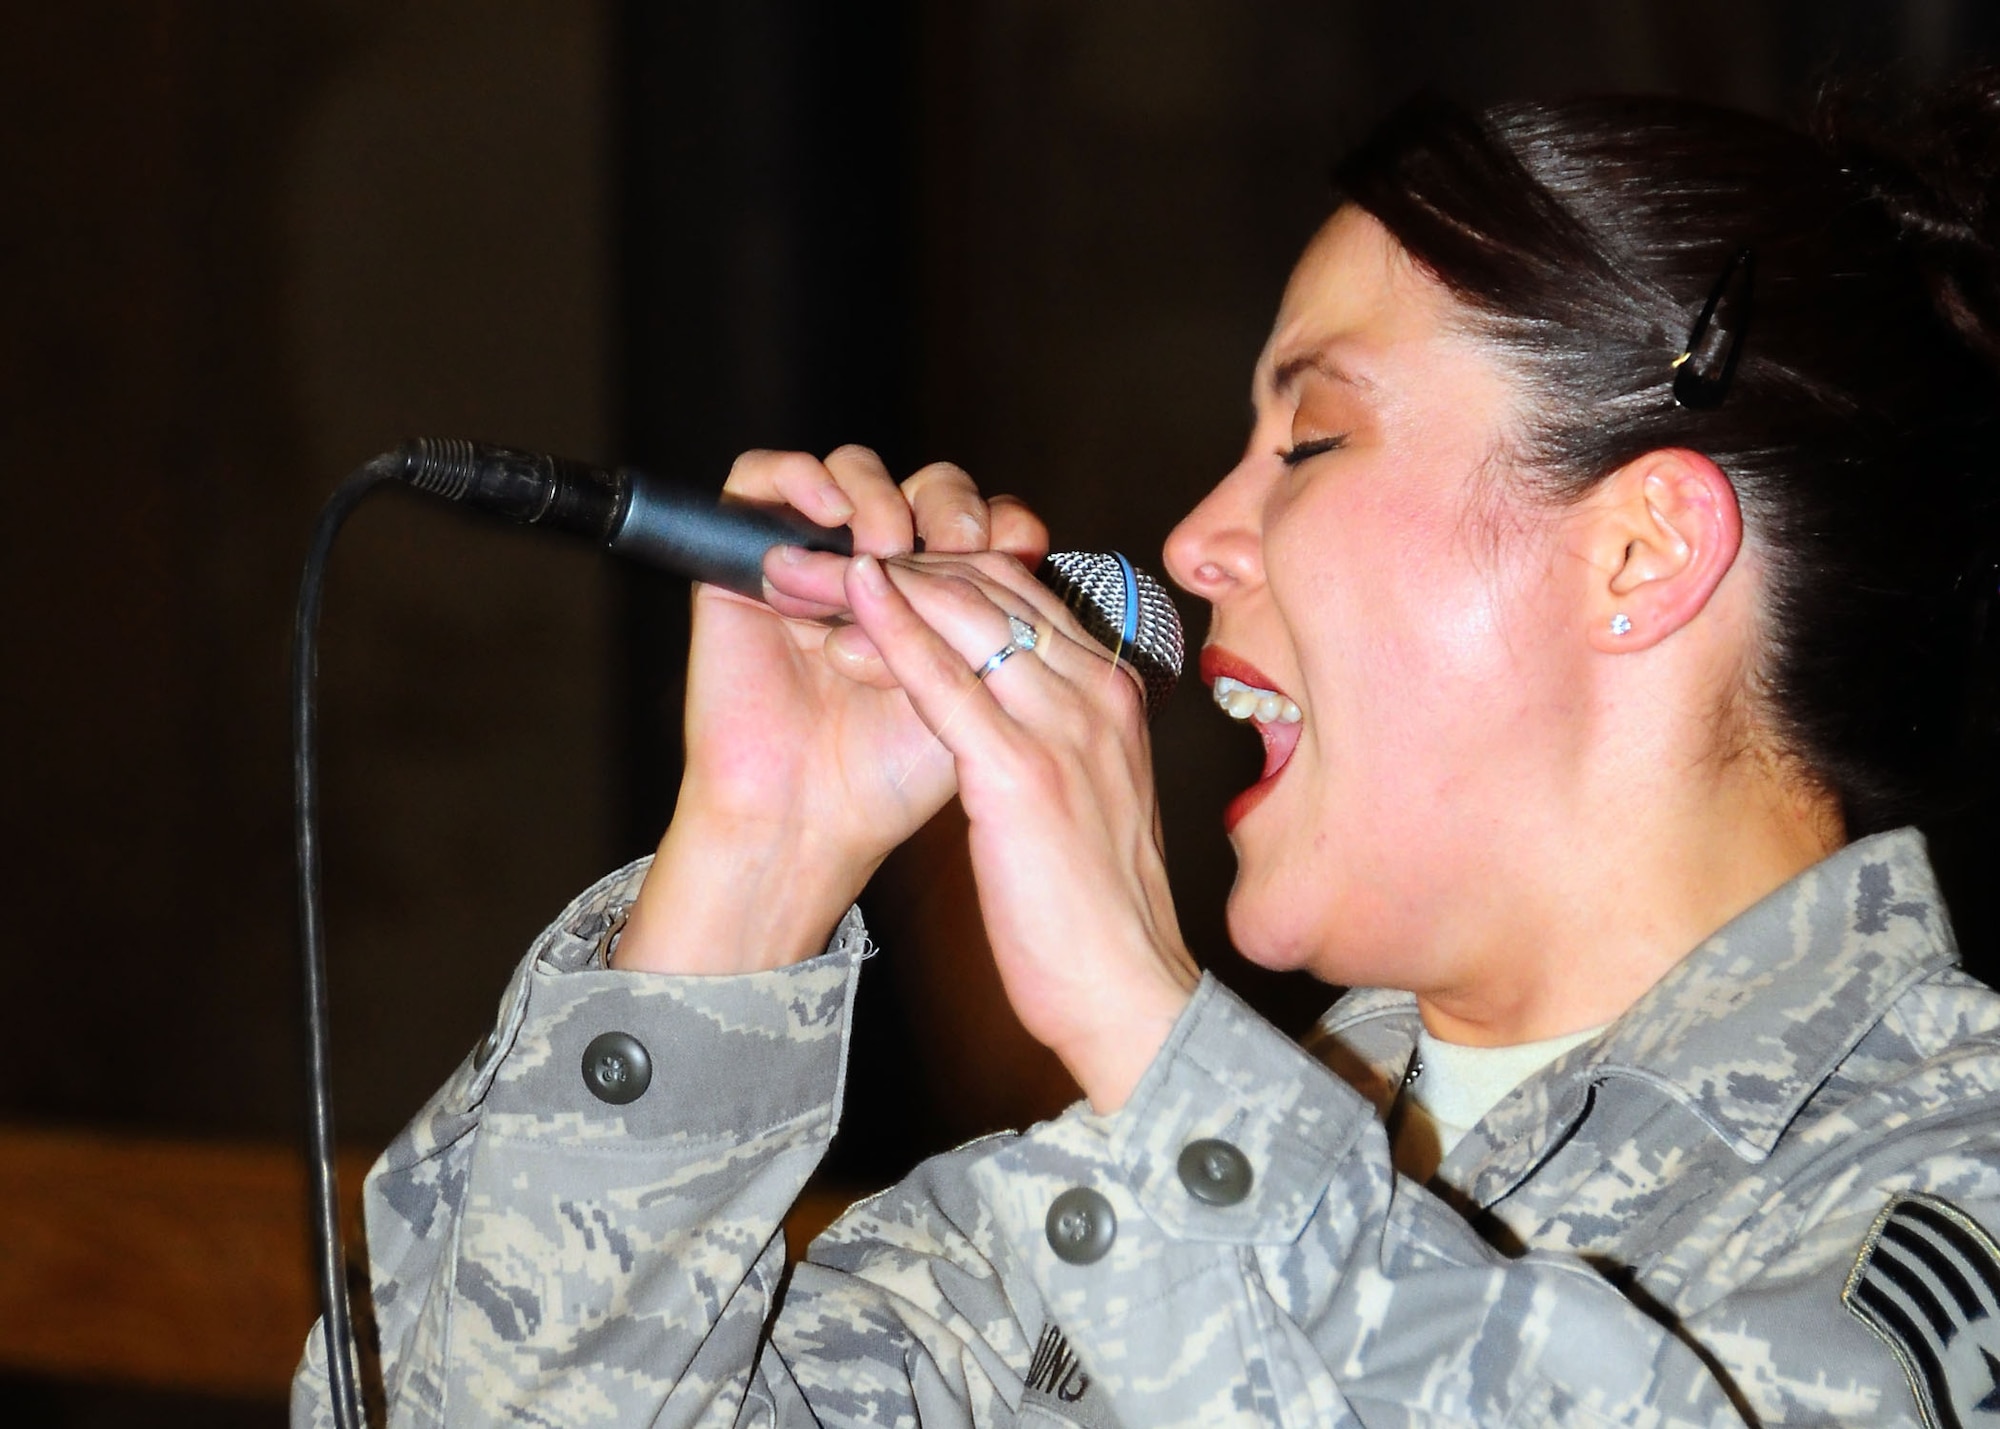 CAMP BUCCA, Iraq-- Staff Sgt. Angie Long, Air Force Central Command Sonora band, sings during a performance for members of Camp Bucca, Iraq on July 22.  Sonora offers a diverse performance repertoire featuring acoustic, electric and bass guitars, keyboards, drums, saxophone and trumpet.  Vocalists round-out the mix and an expert engineer brings it all together.  Sergeant Long is deployed from the 131st Fighter Wing, Air National Guard, Mo., and hails from Nashville, Tenn.  (U.S. Air Force photo/Tech Sgt. Tony Tolley)